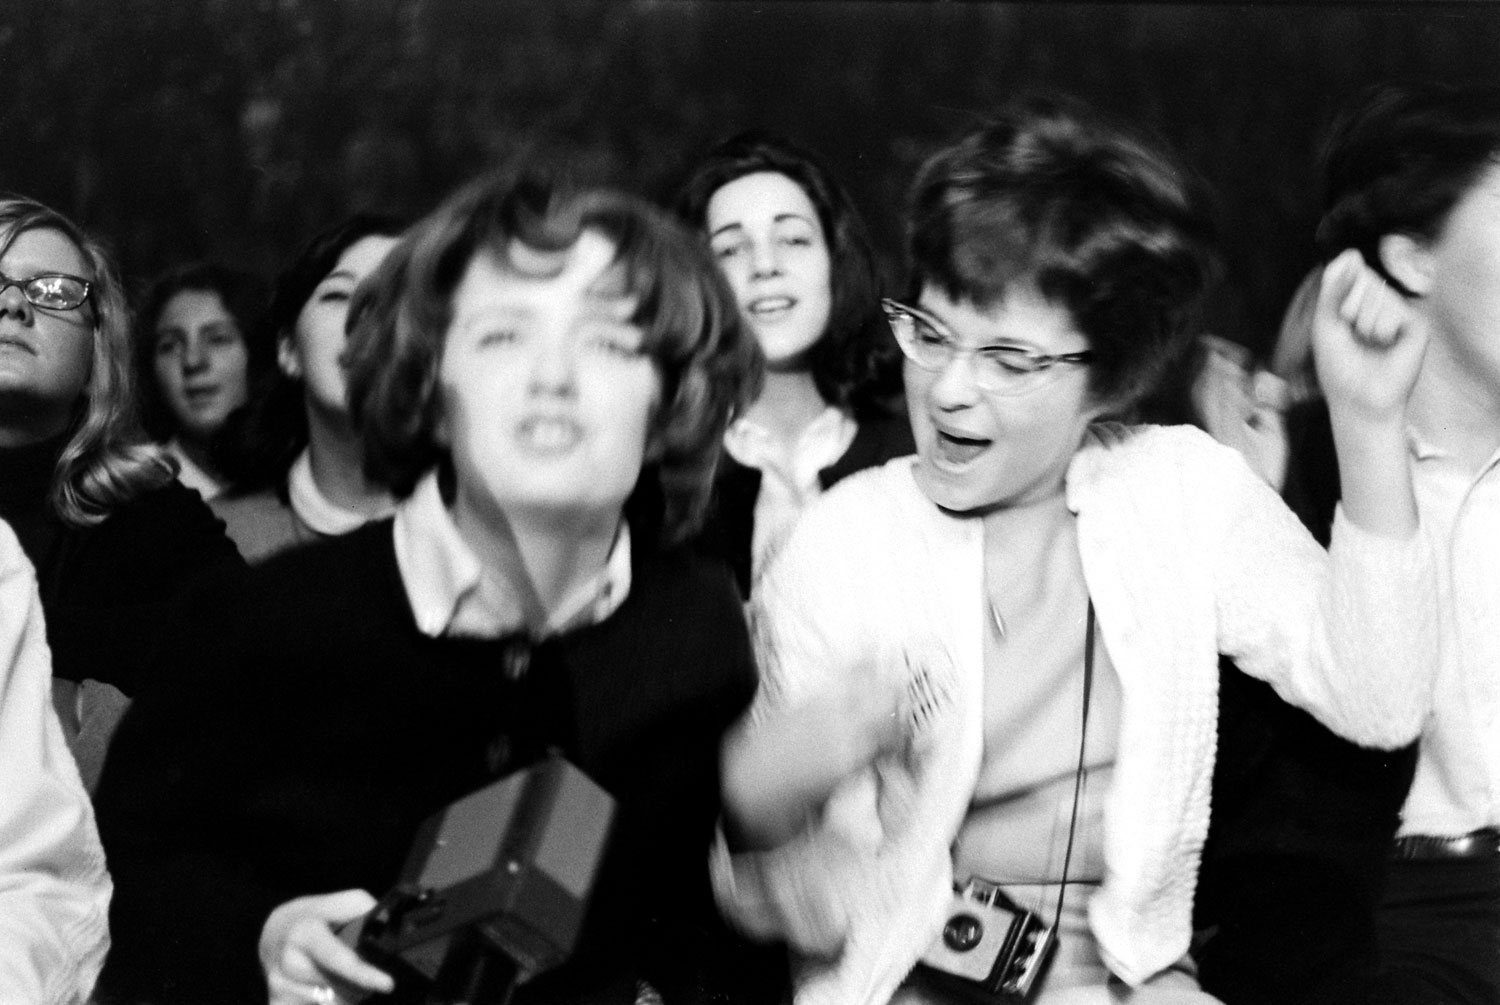 Fans at the first Beatles concert in America, Washington, DC, Feb. 11, 1964.